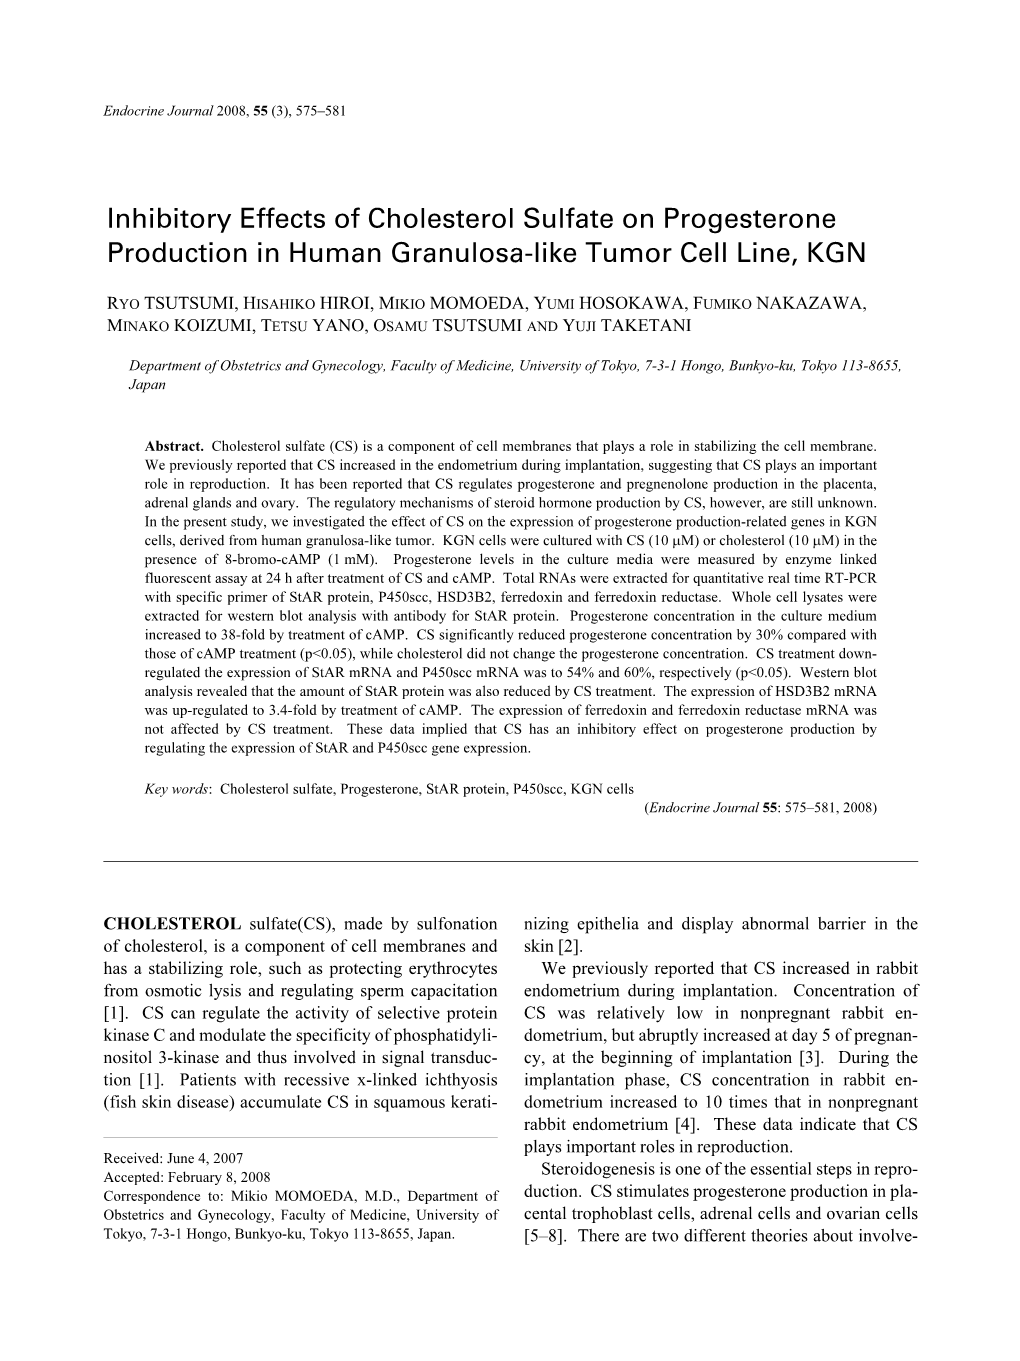 Inhibitory Effects of Cholesterol Sulfate on Progesterone Production in Human Granulosa-Like Tumor Cell Line, KGN